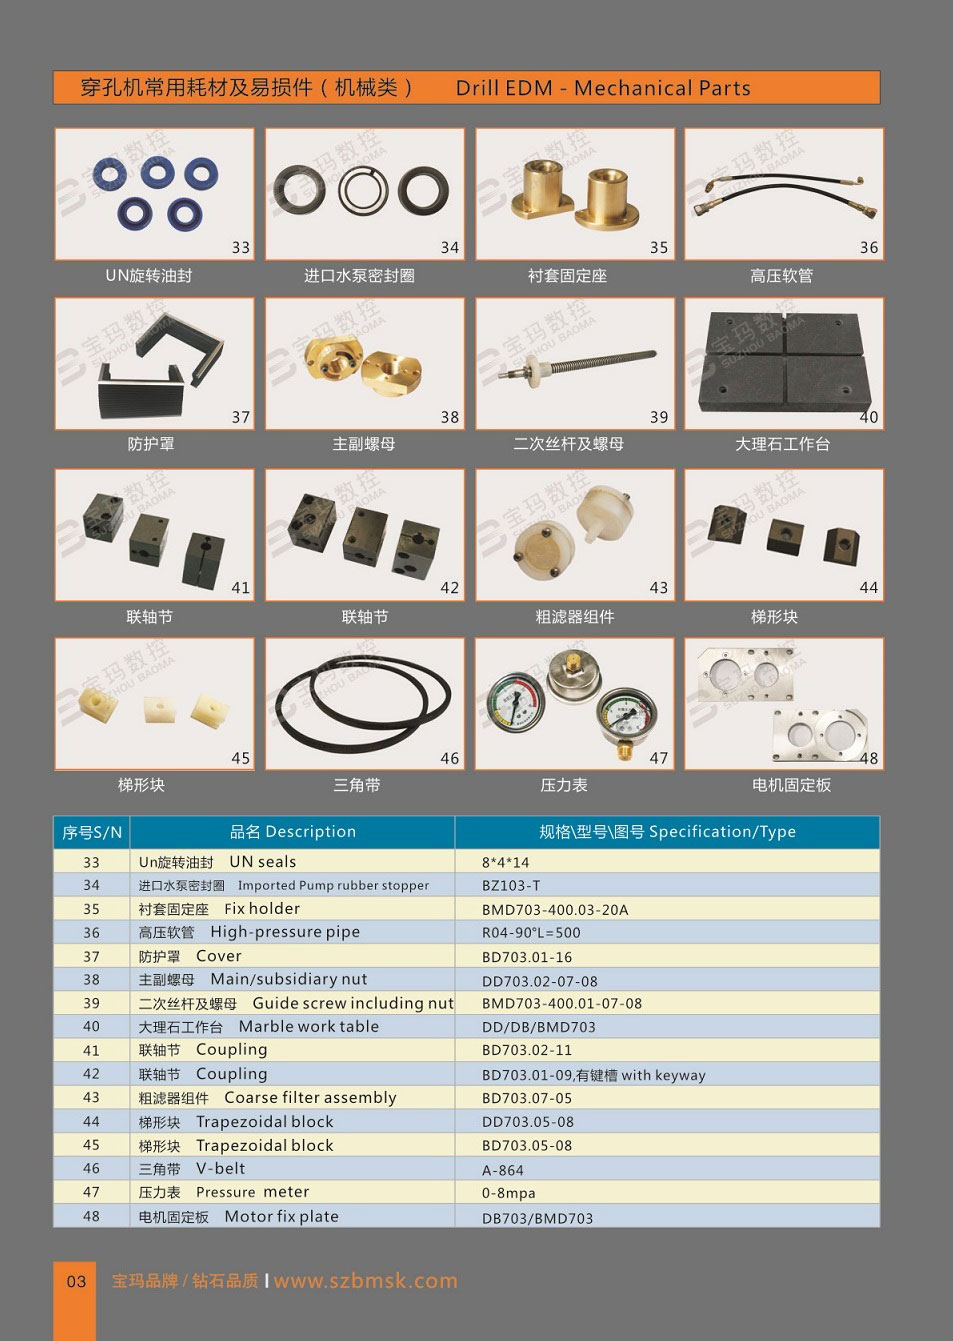 Mechanical Parts /Consumable Parts for Drill EDM Machines